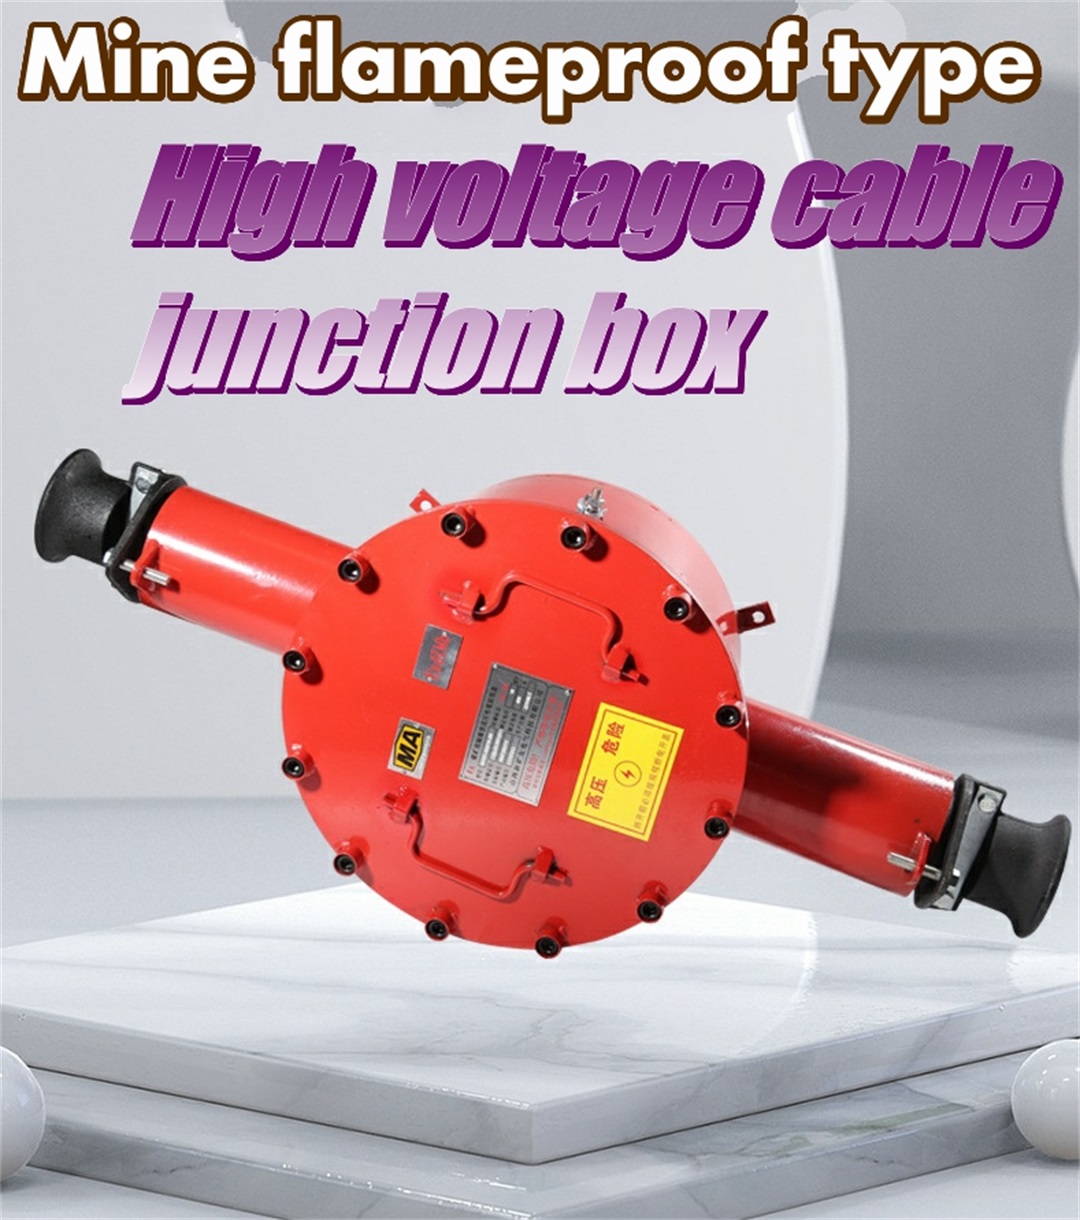 Mine explosion-proof high-voltage cable junction box